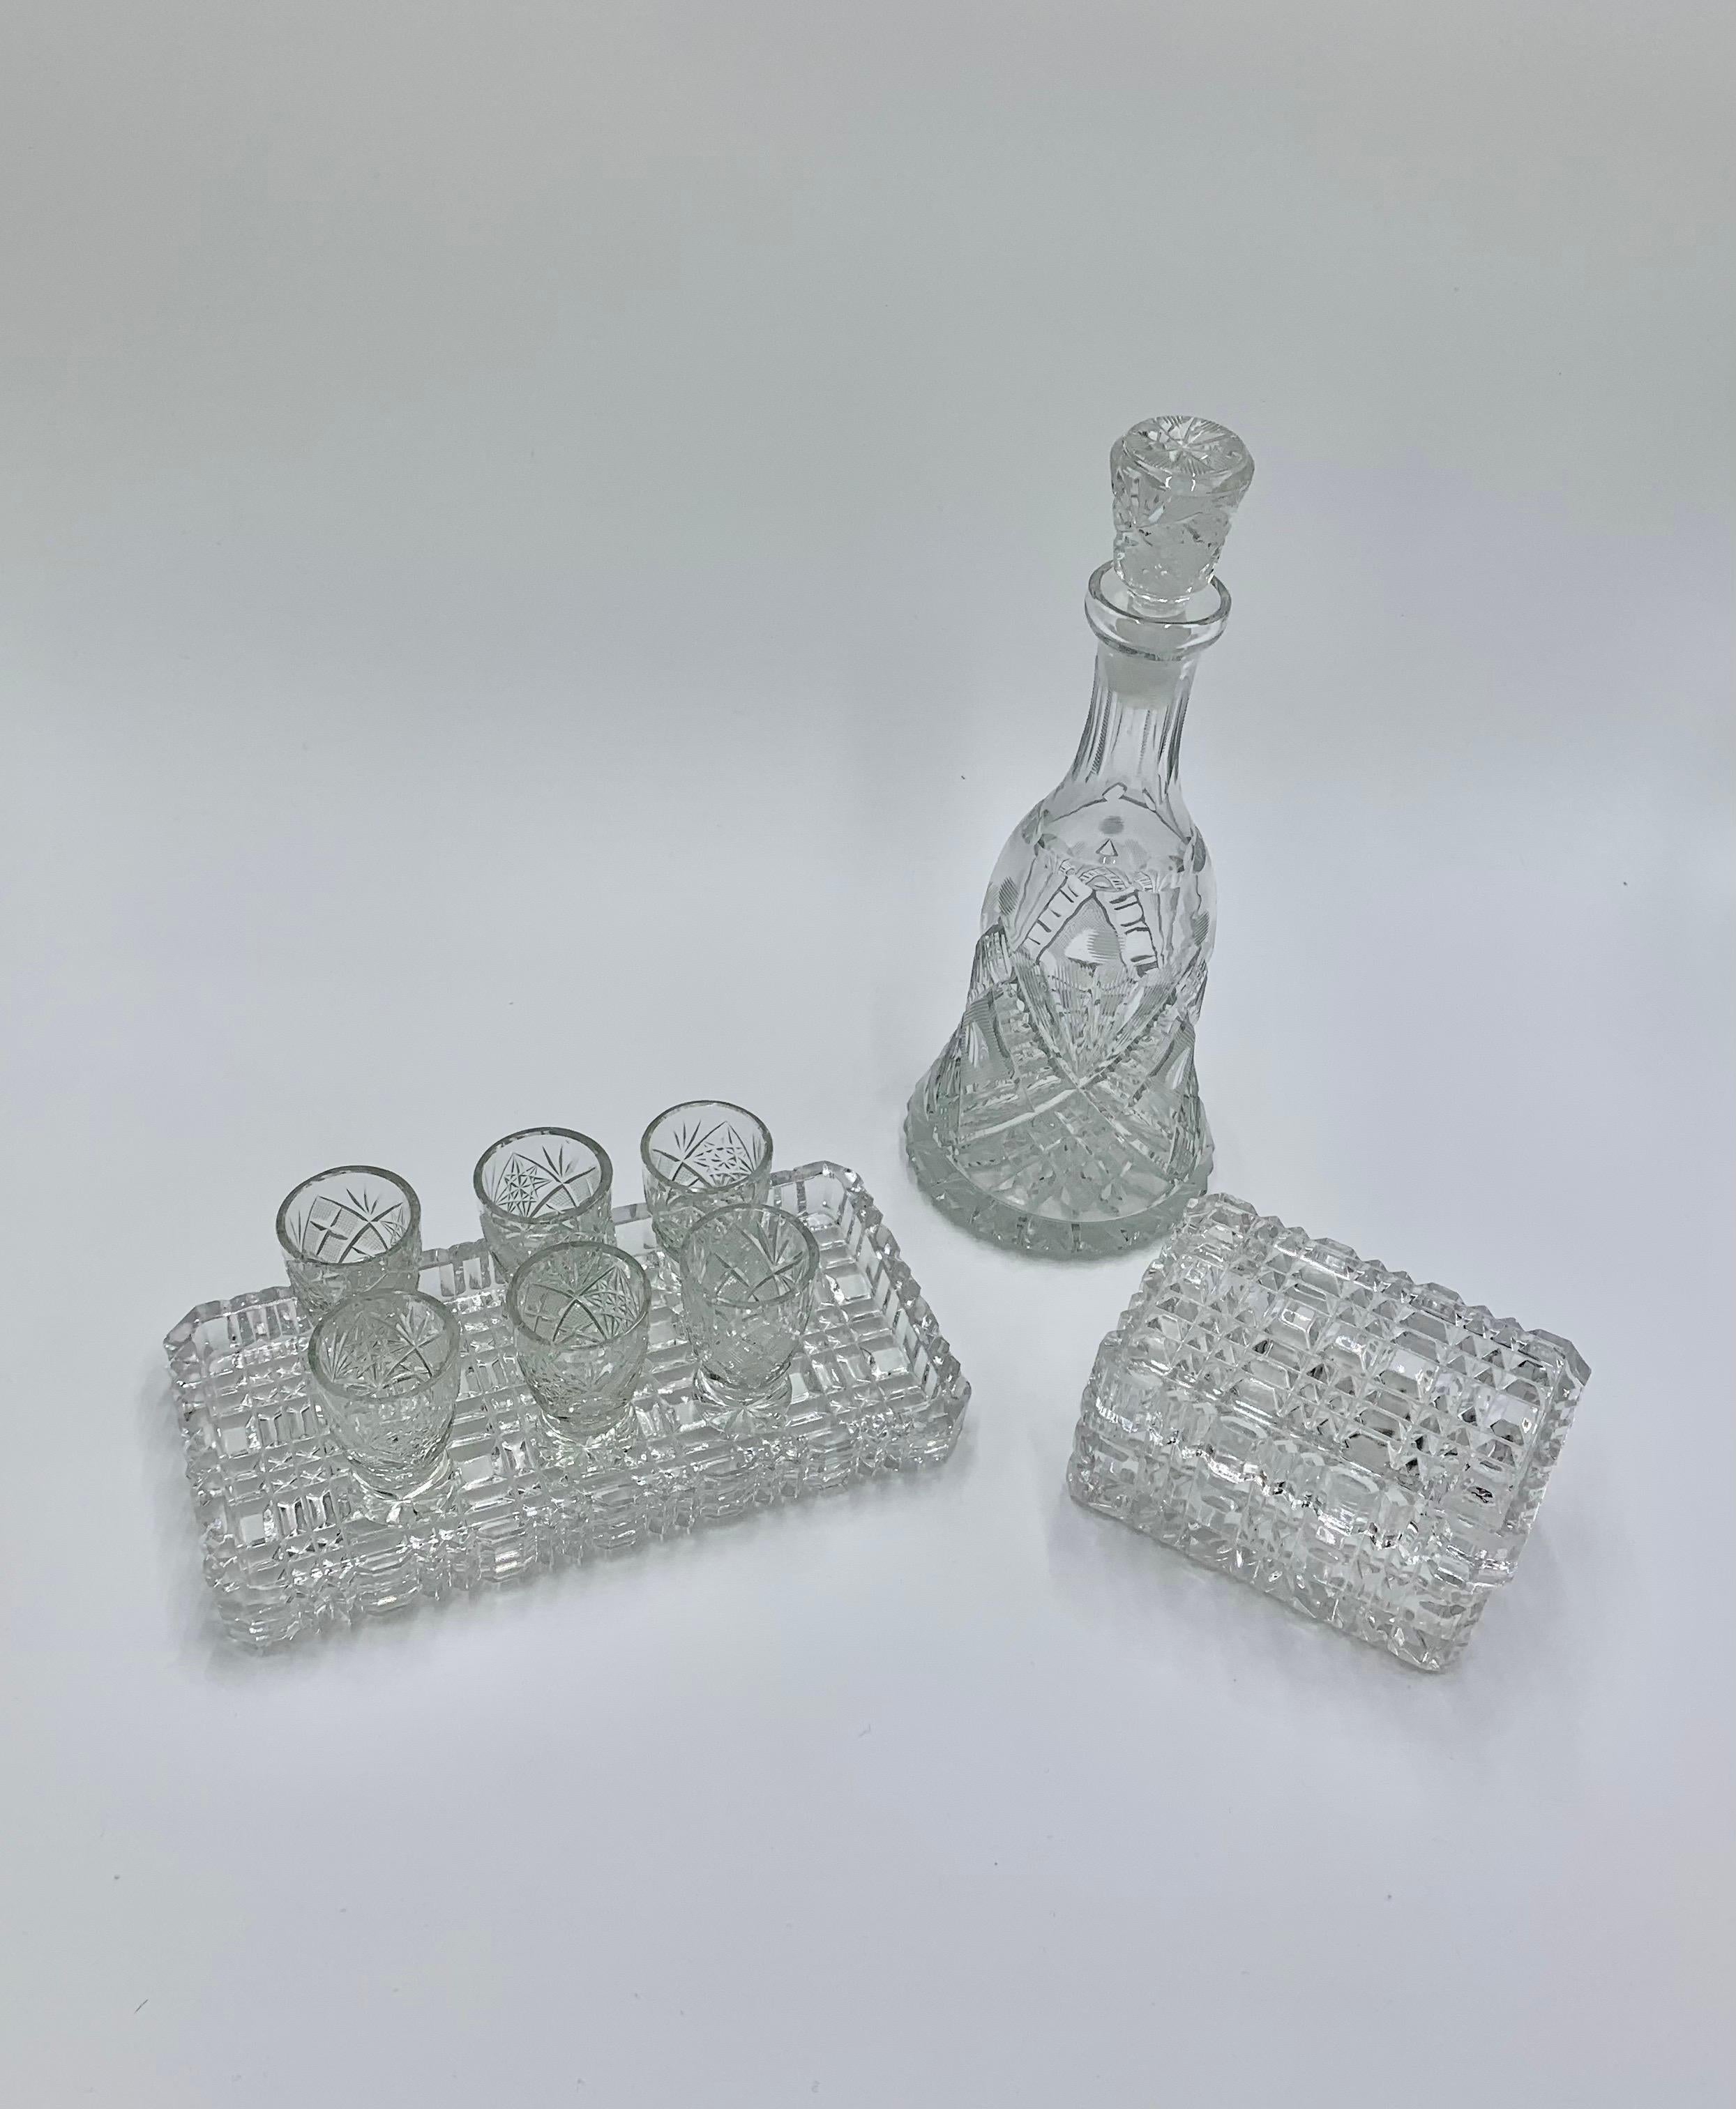 Set of 3 crystal clear items - decanter, small glasses on tray and casket.
Made in Poland in middle XX century
Very good condition 
Decanter : height 27cm diameter 9cm
Tray : width 21 x 12 cm
Casket : height 7 cm , width 13cmx9cm.